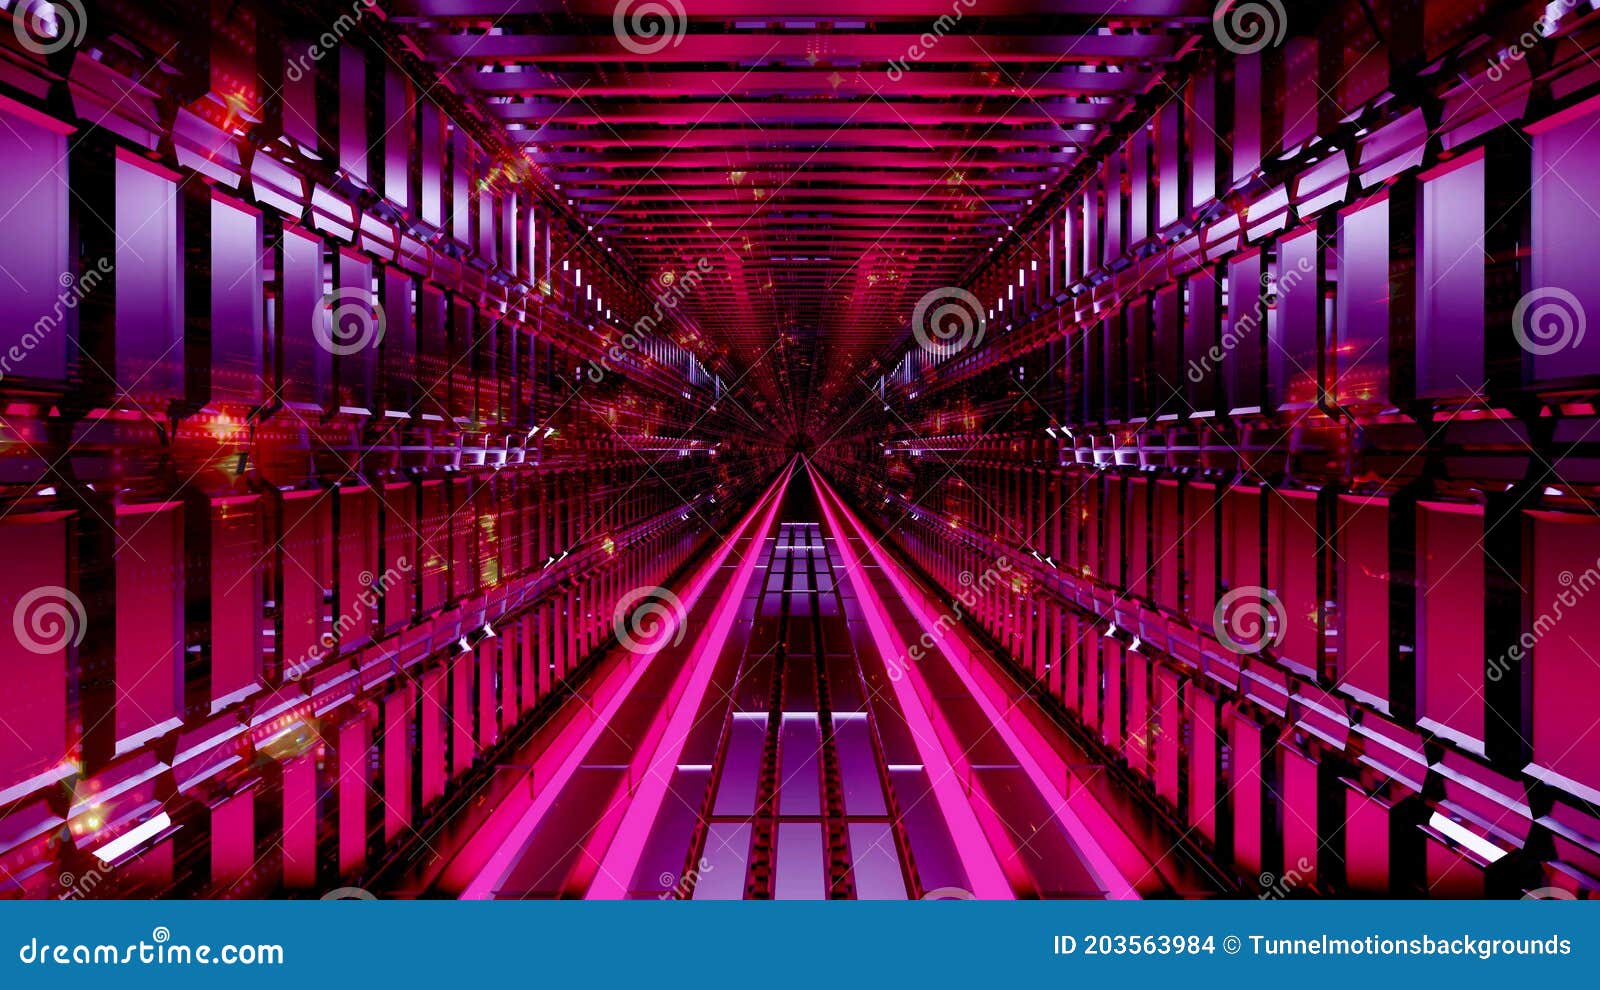 Cool Futuristic Science Fiction Tunnel 3d Illustration Vfx Background  Wallpaper Stock Illustration - Illustration of futuristic, tunnelmotions:  203563984